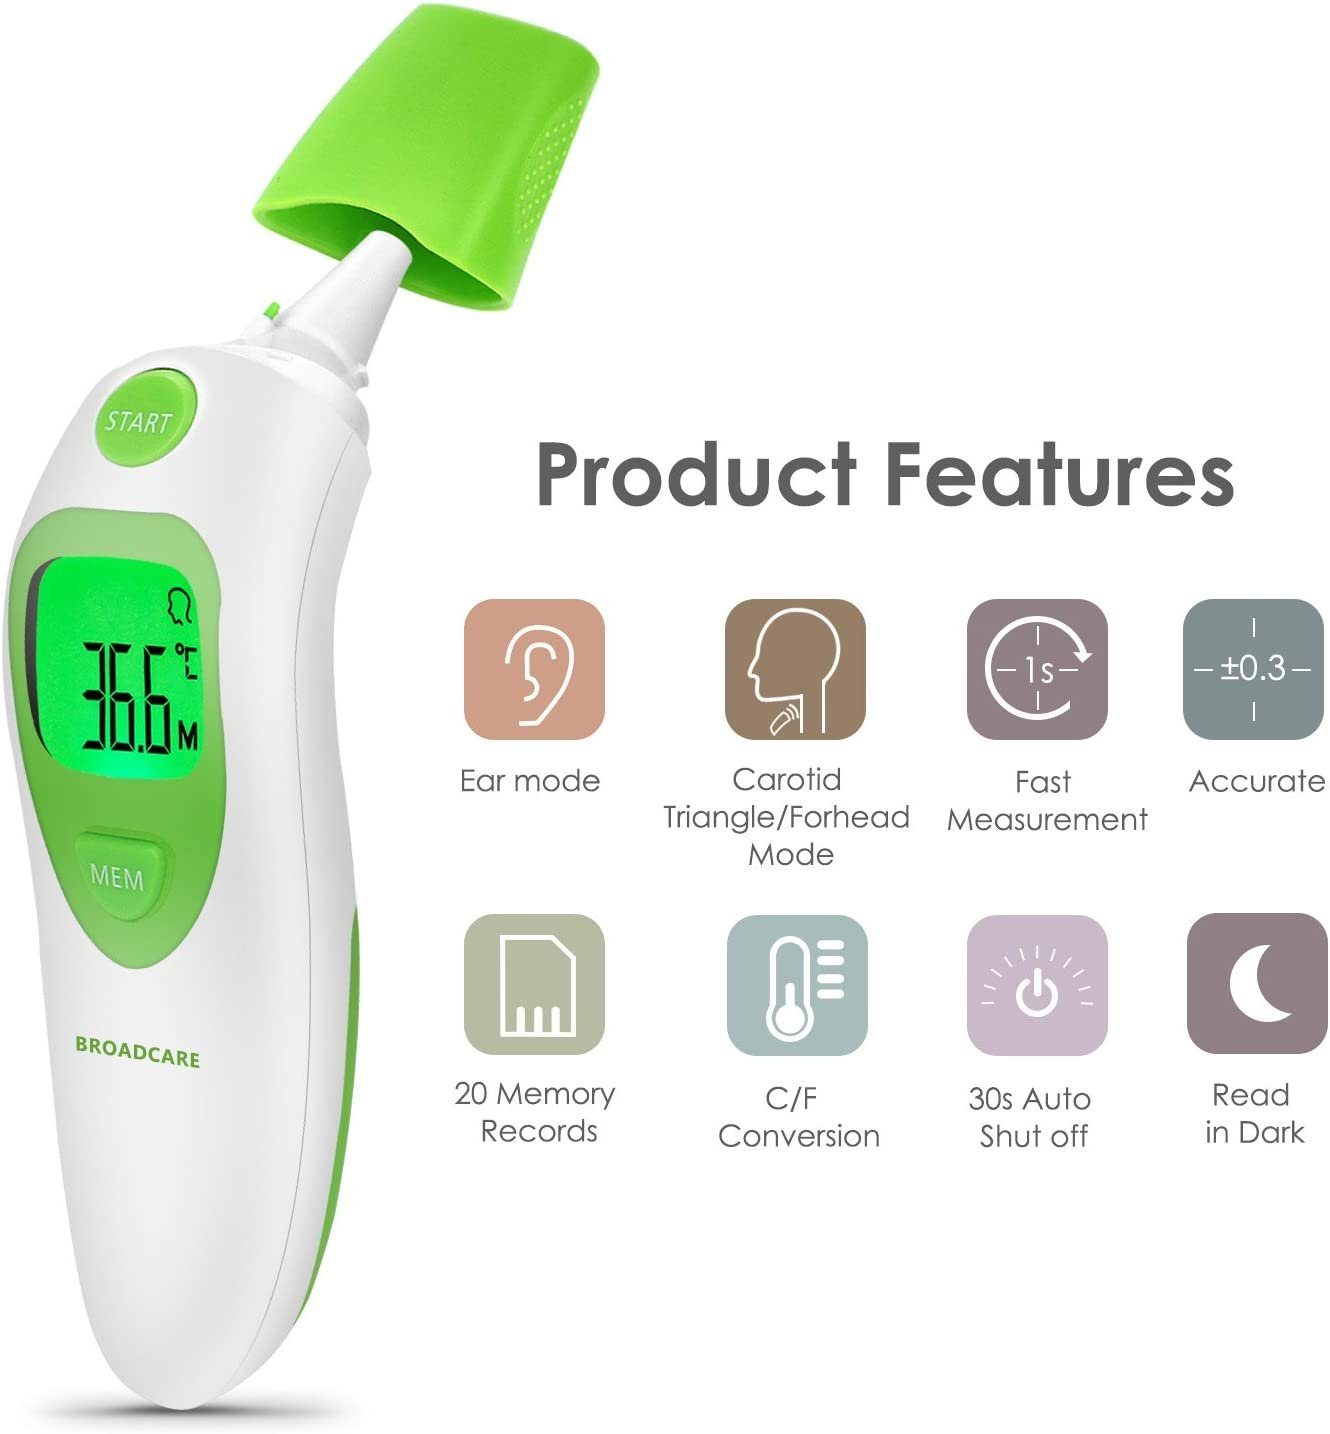 Broadcare Ohr-Fieberthermometer, 4in1 digital LCD Stirnthermometer Infrarot Ohr Fieberthermometer kontaktlos Stirn Thermometer